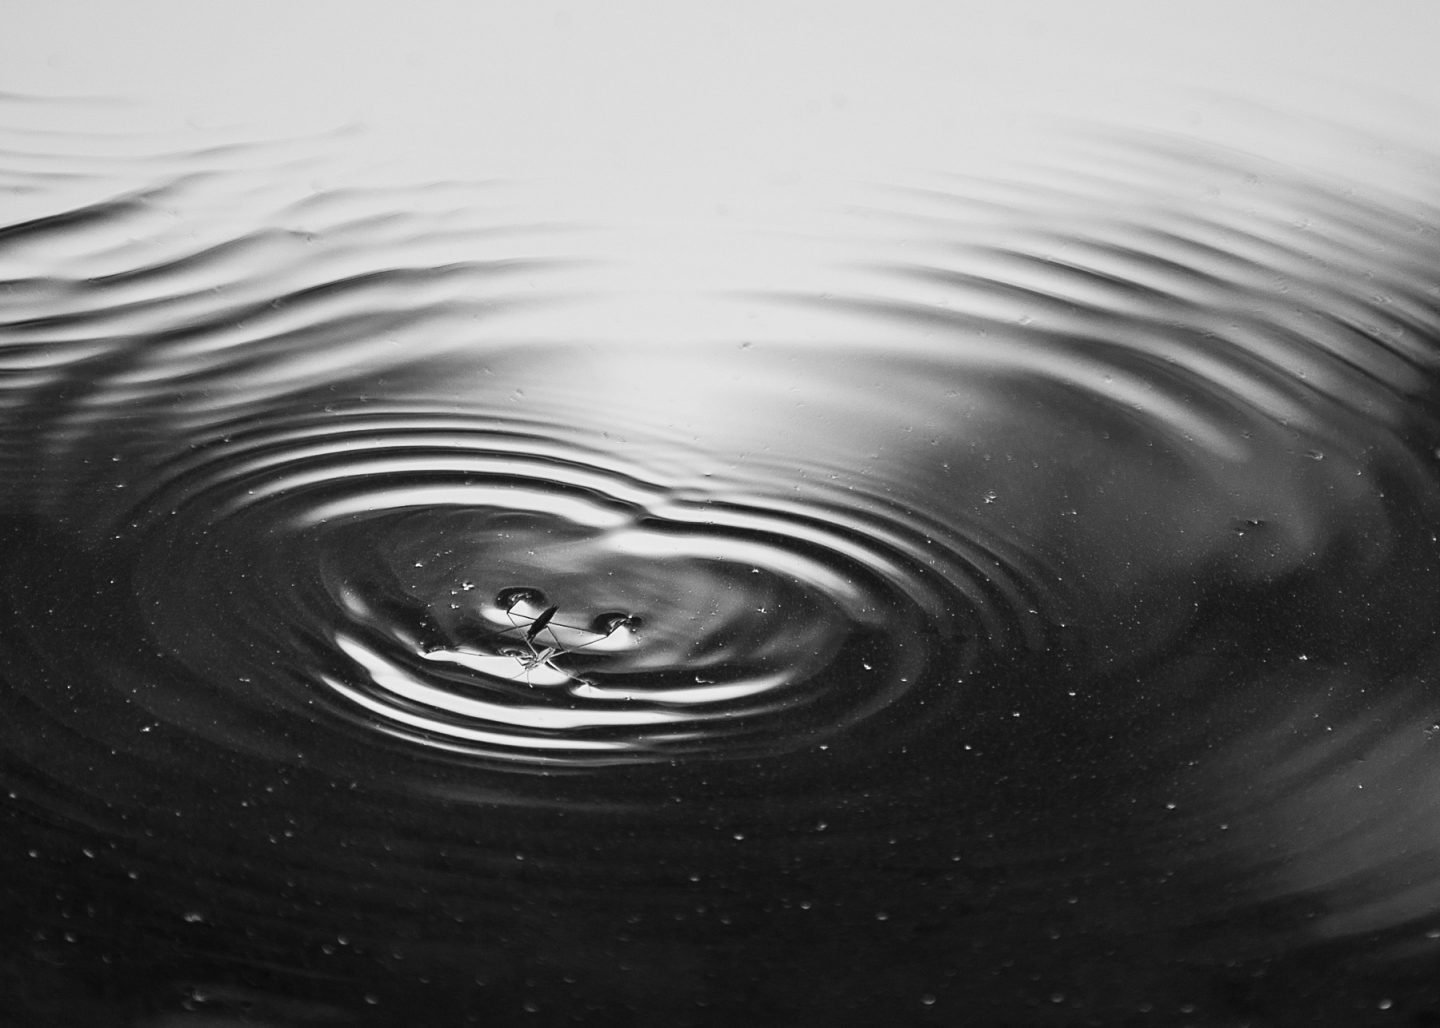 iGNANT-Photography-Lee-Chee-Wai-Water-001